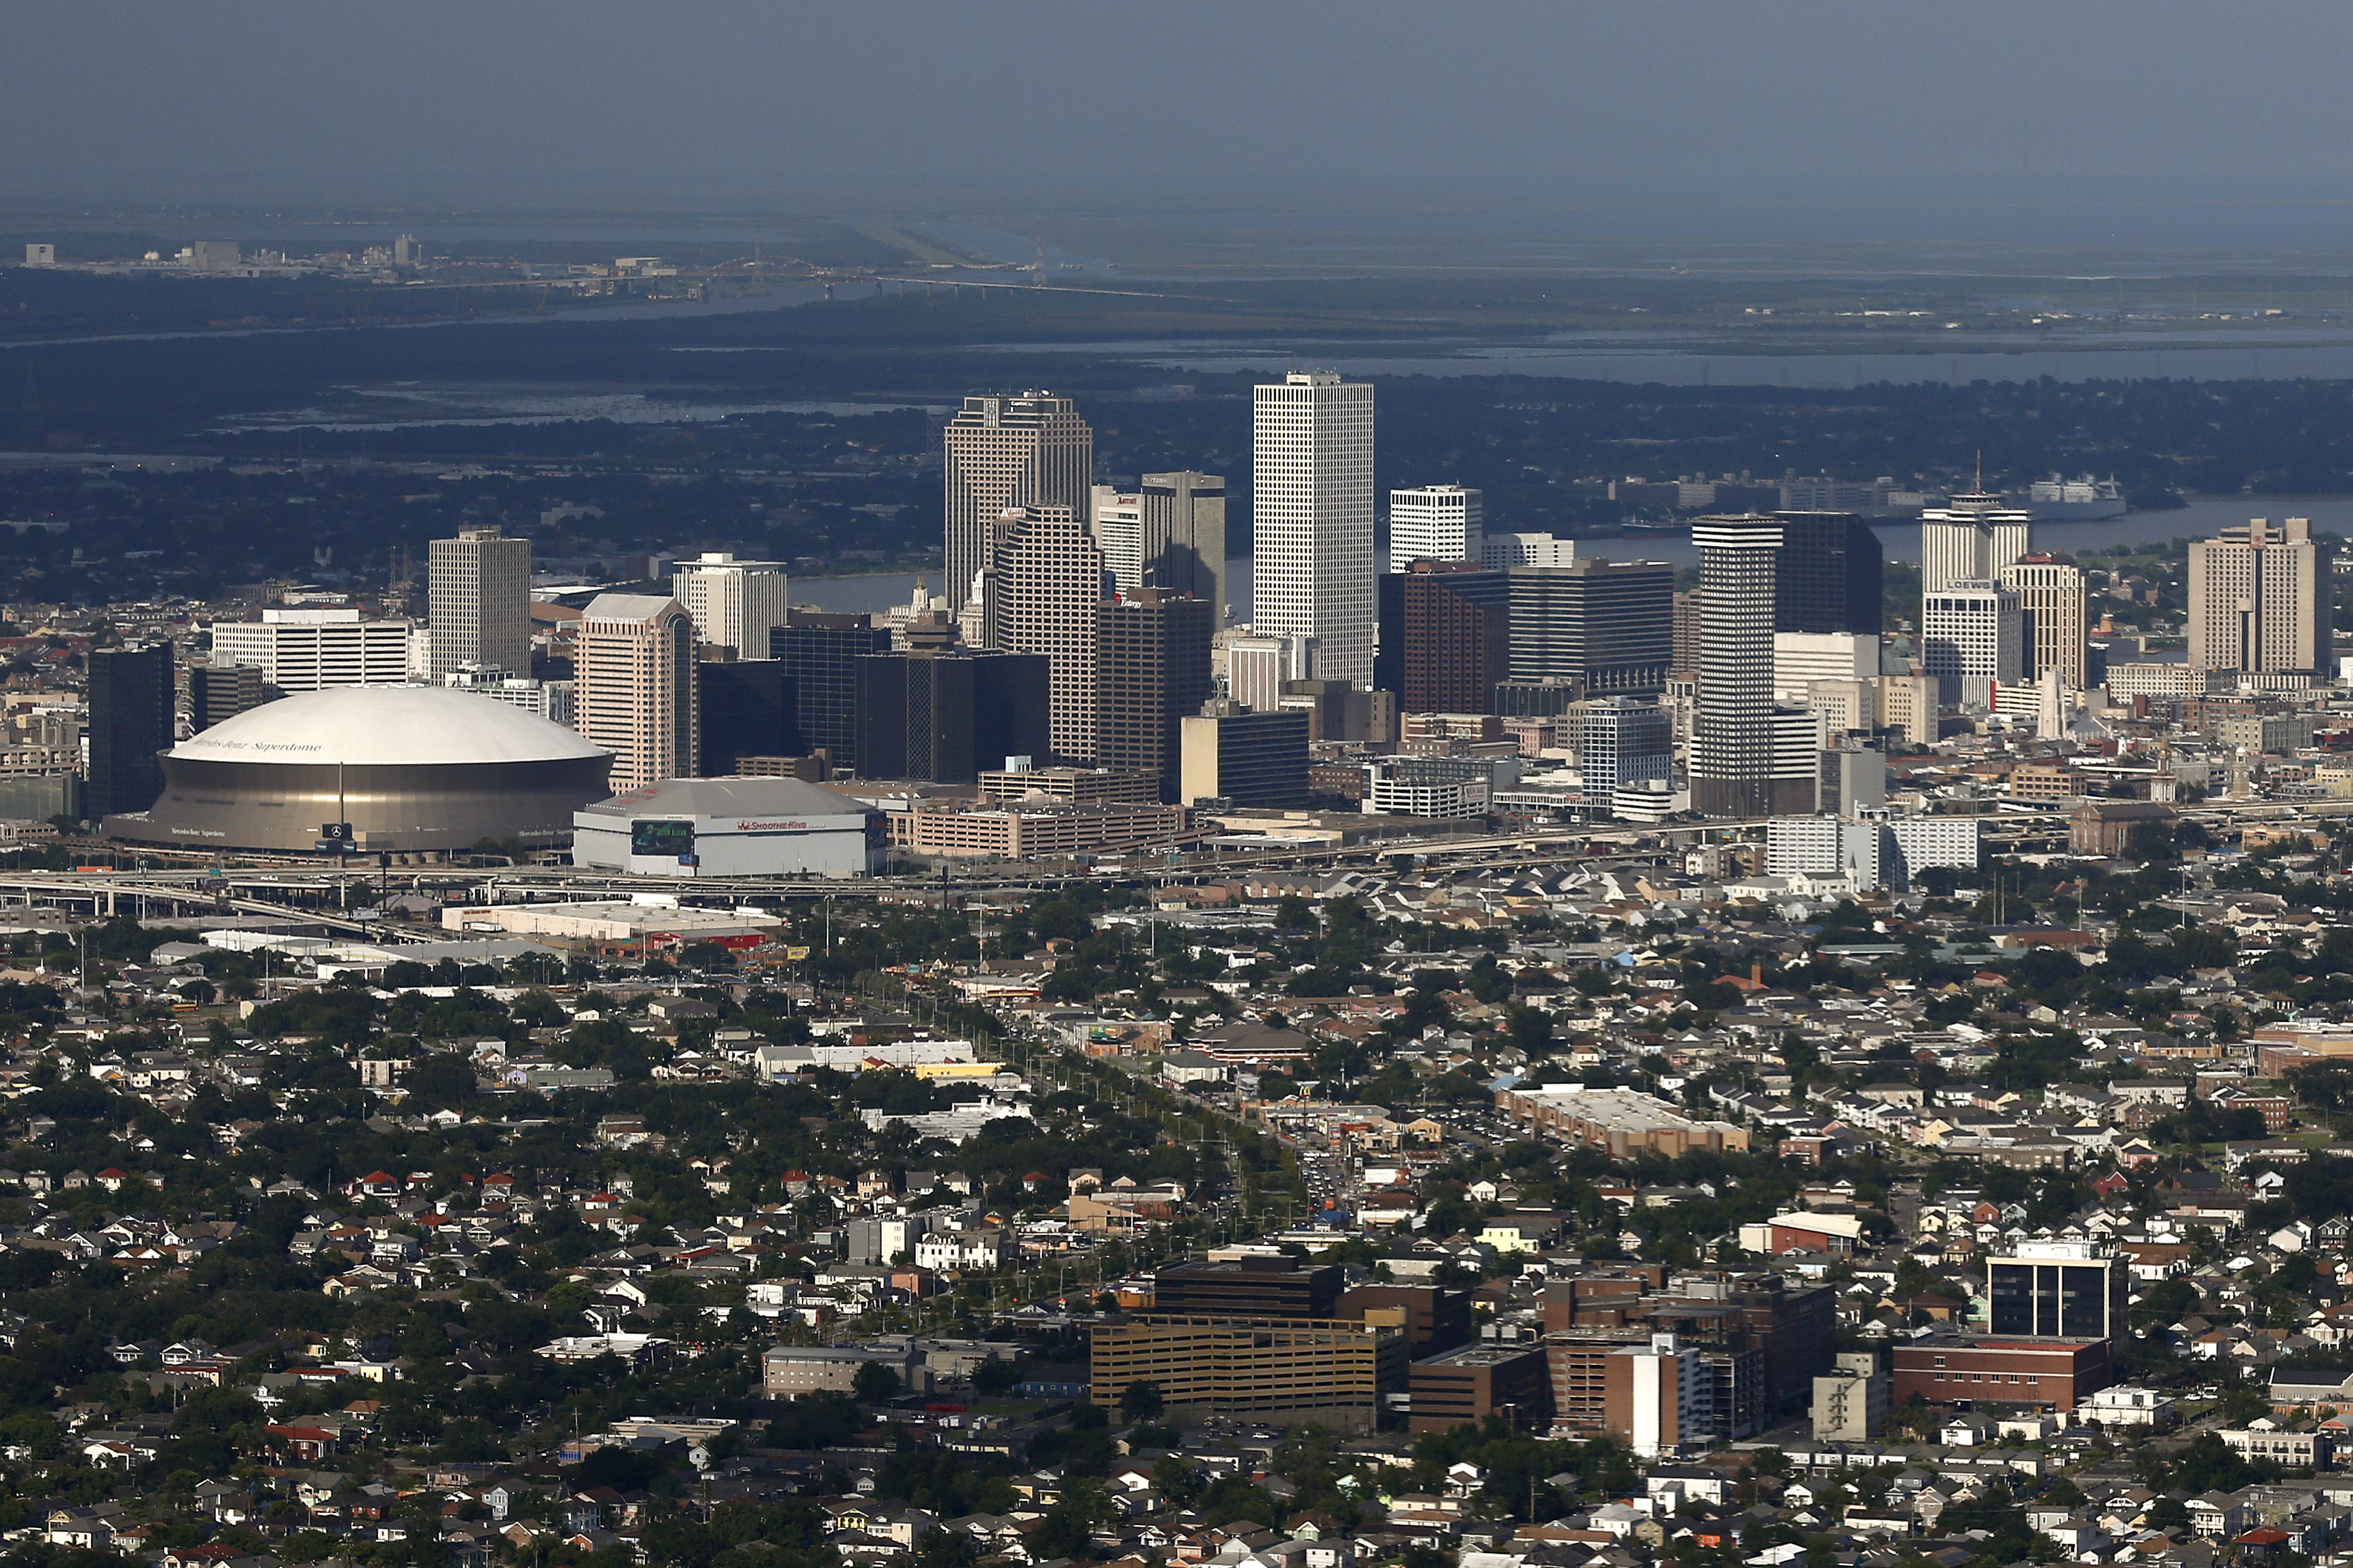 The skyline of New Orleans